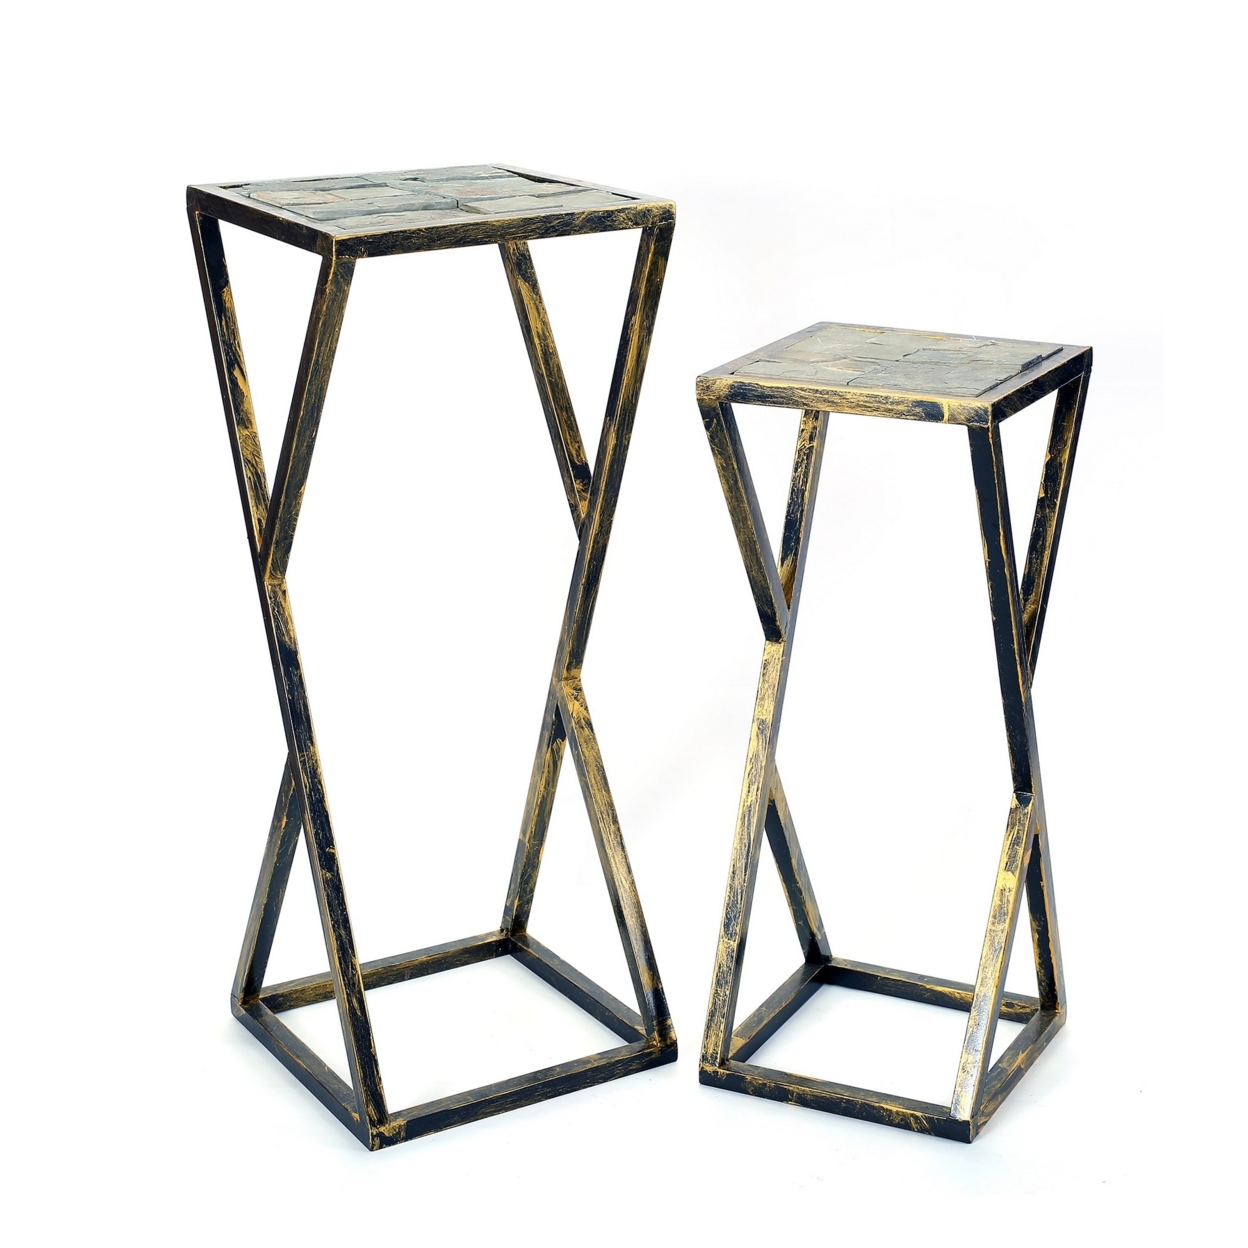 Stone Top Plant Stand With Geometric Base, Set Of 2, Black And Gray- Saltoro Sherpi